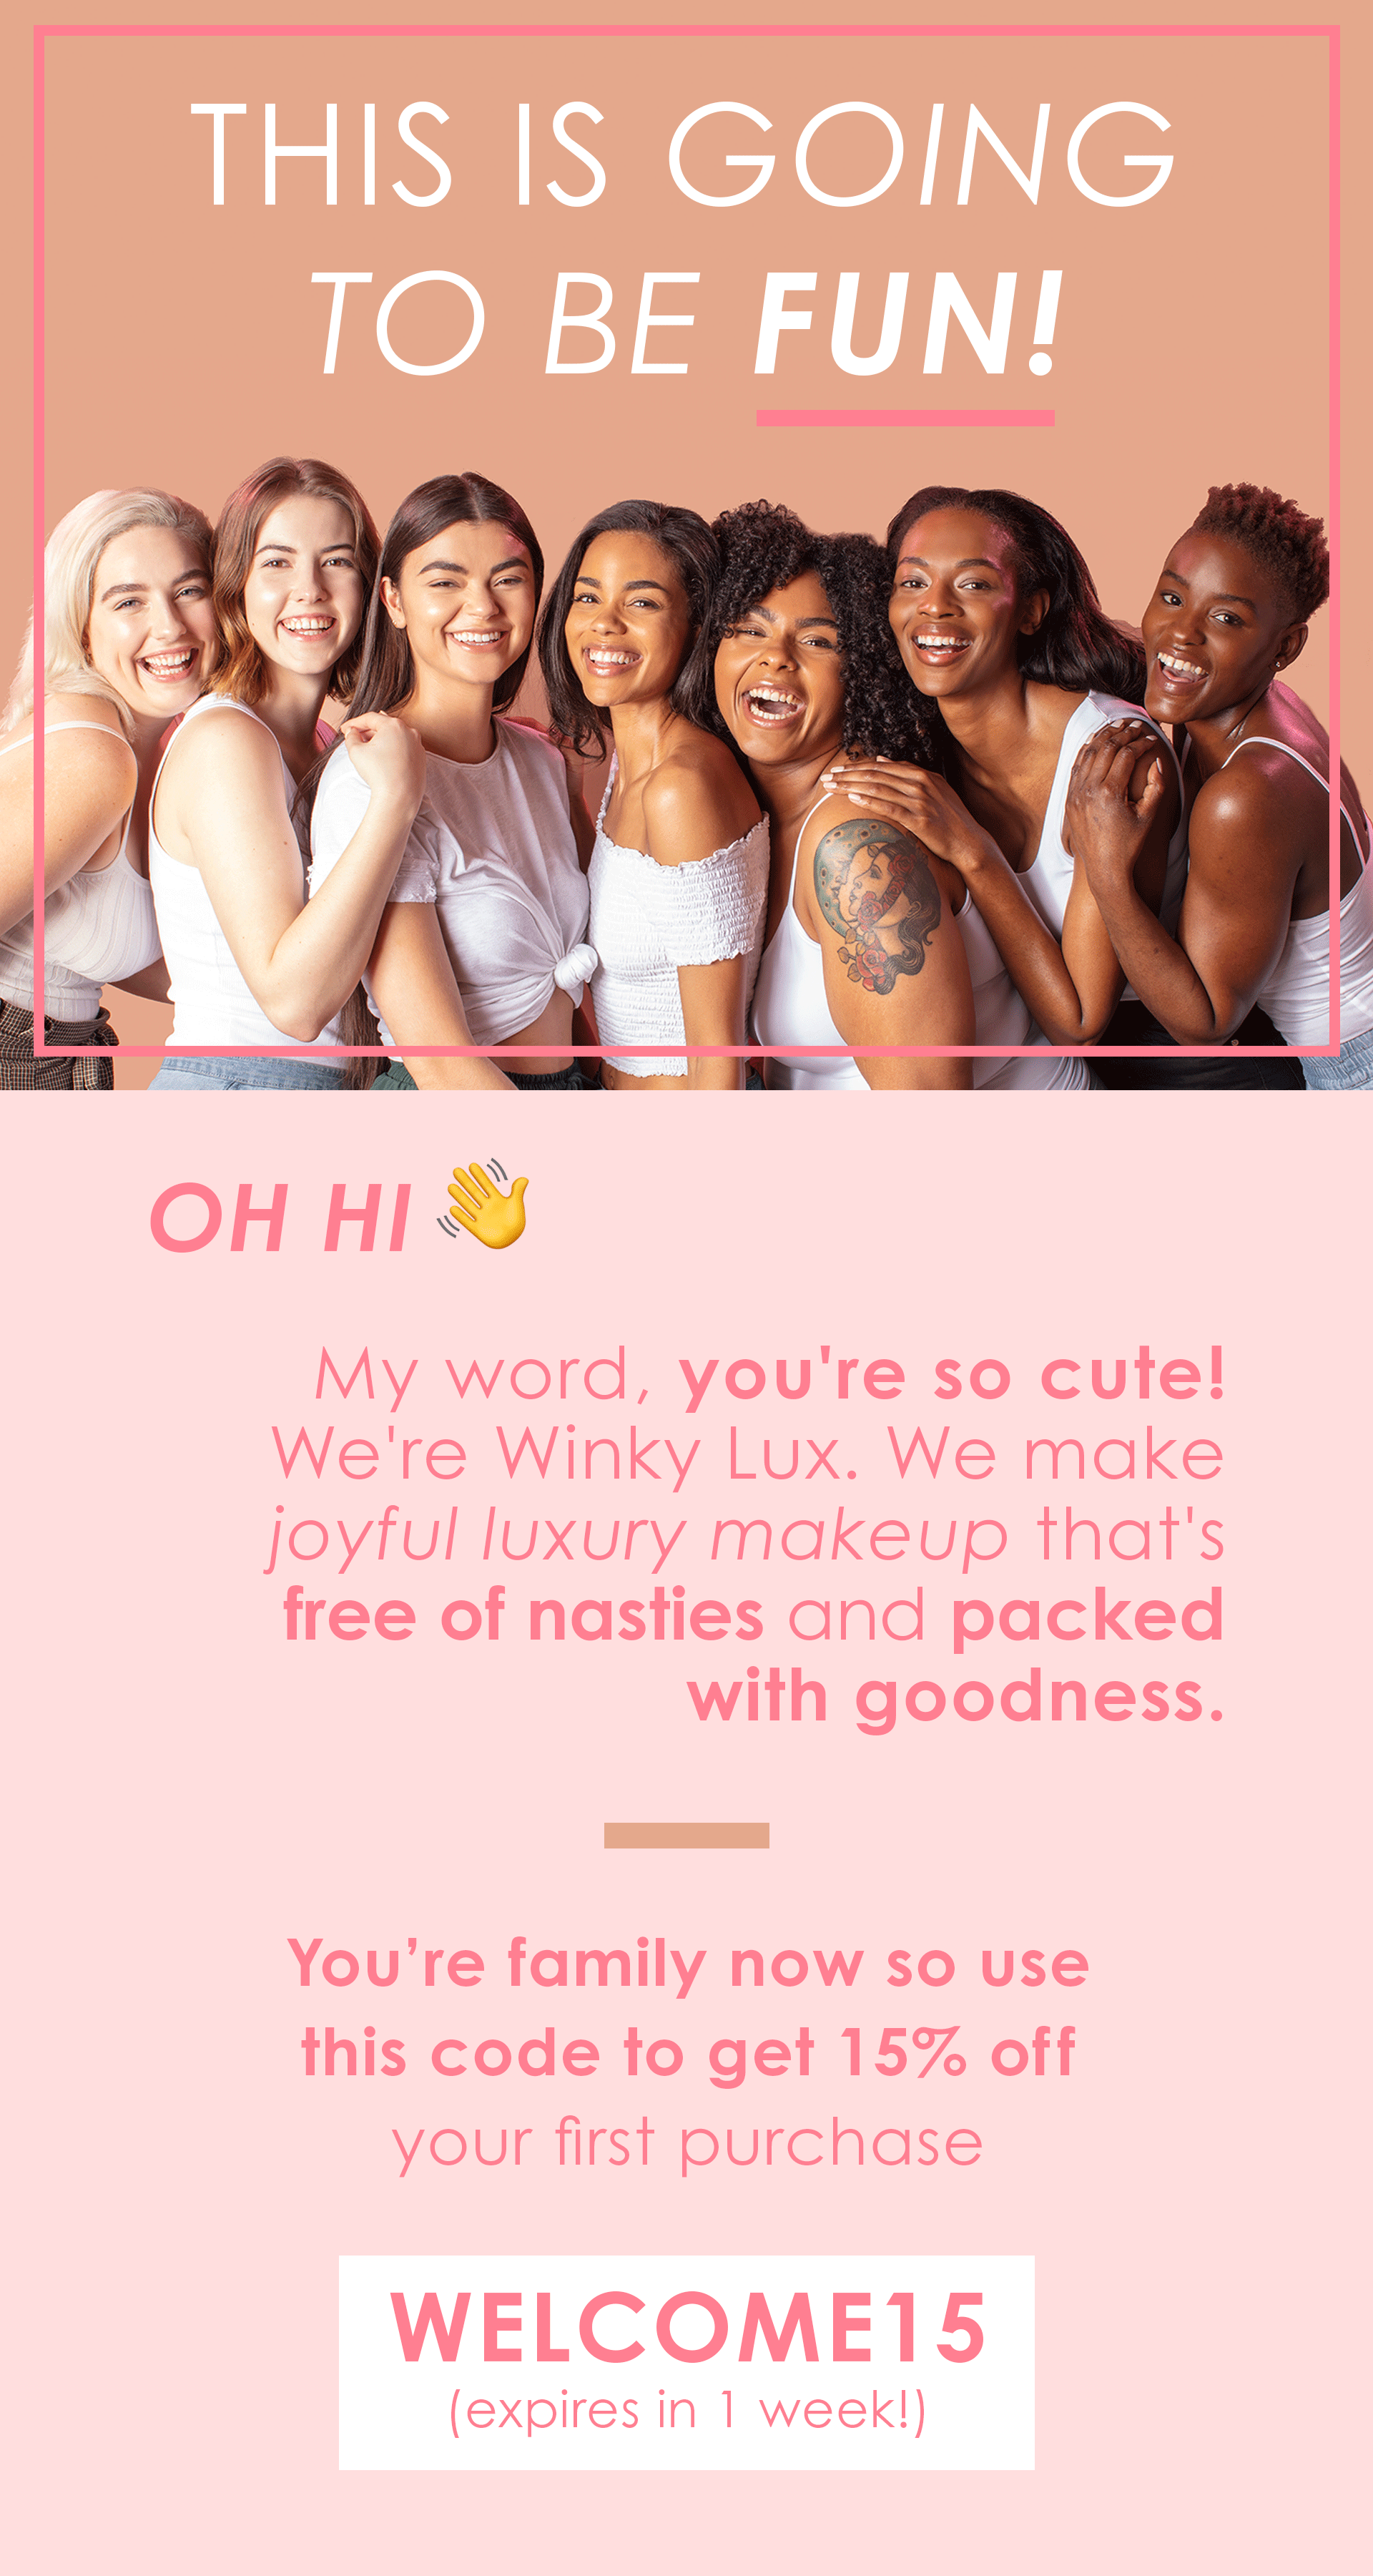 Welcome to Winky Lux